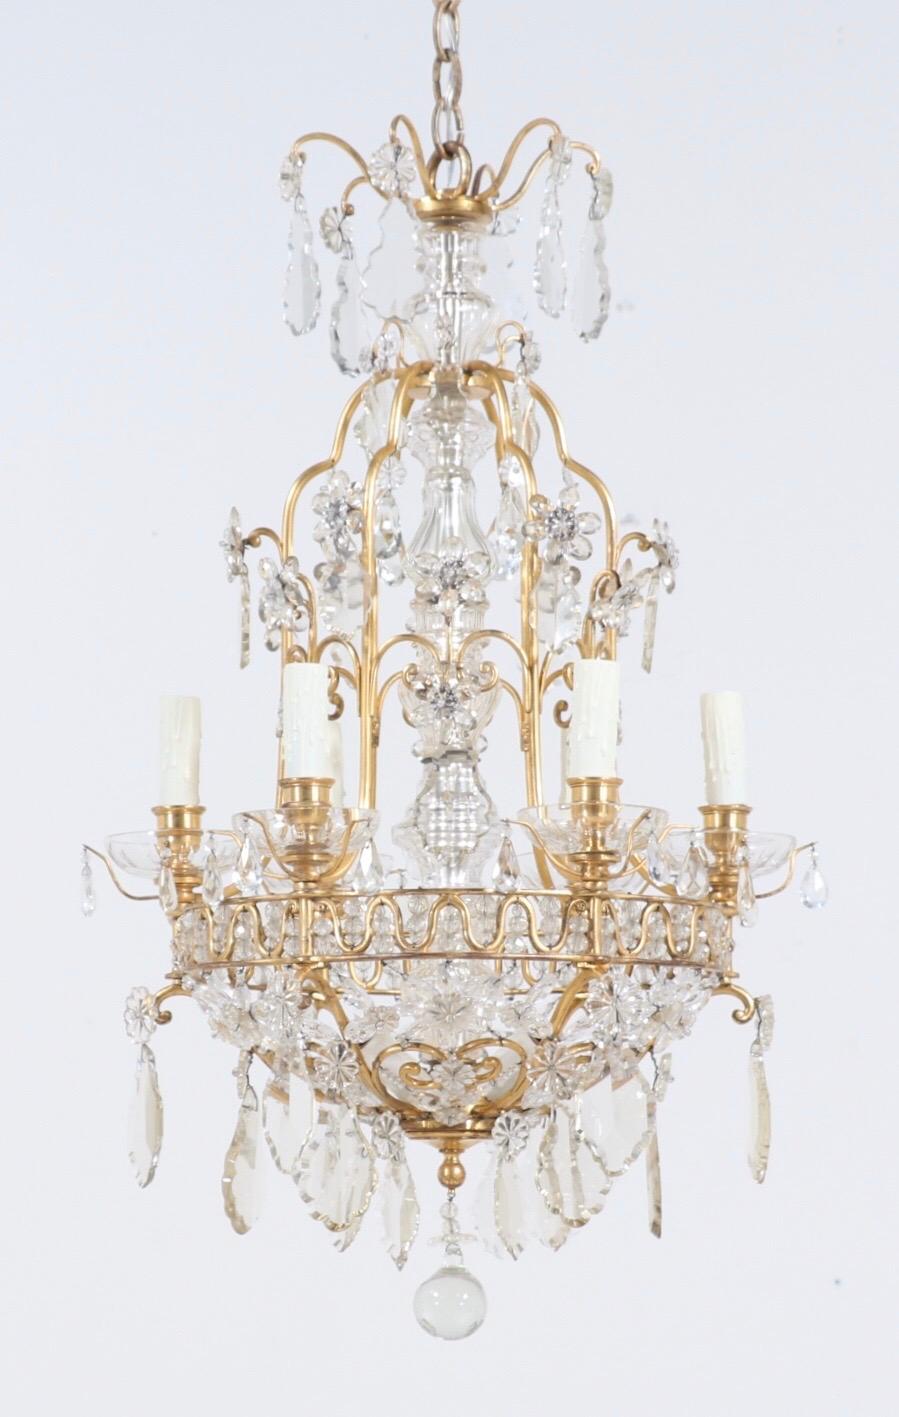 A fine, 1920s French bronze and crystal chandelier in the neoclassical style. 

This amazing chandelier consists of a delicately scrolled bronze doré frame in a basket form. The doré finish has slightly worn off over the decades. The frame is